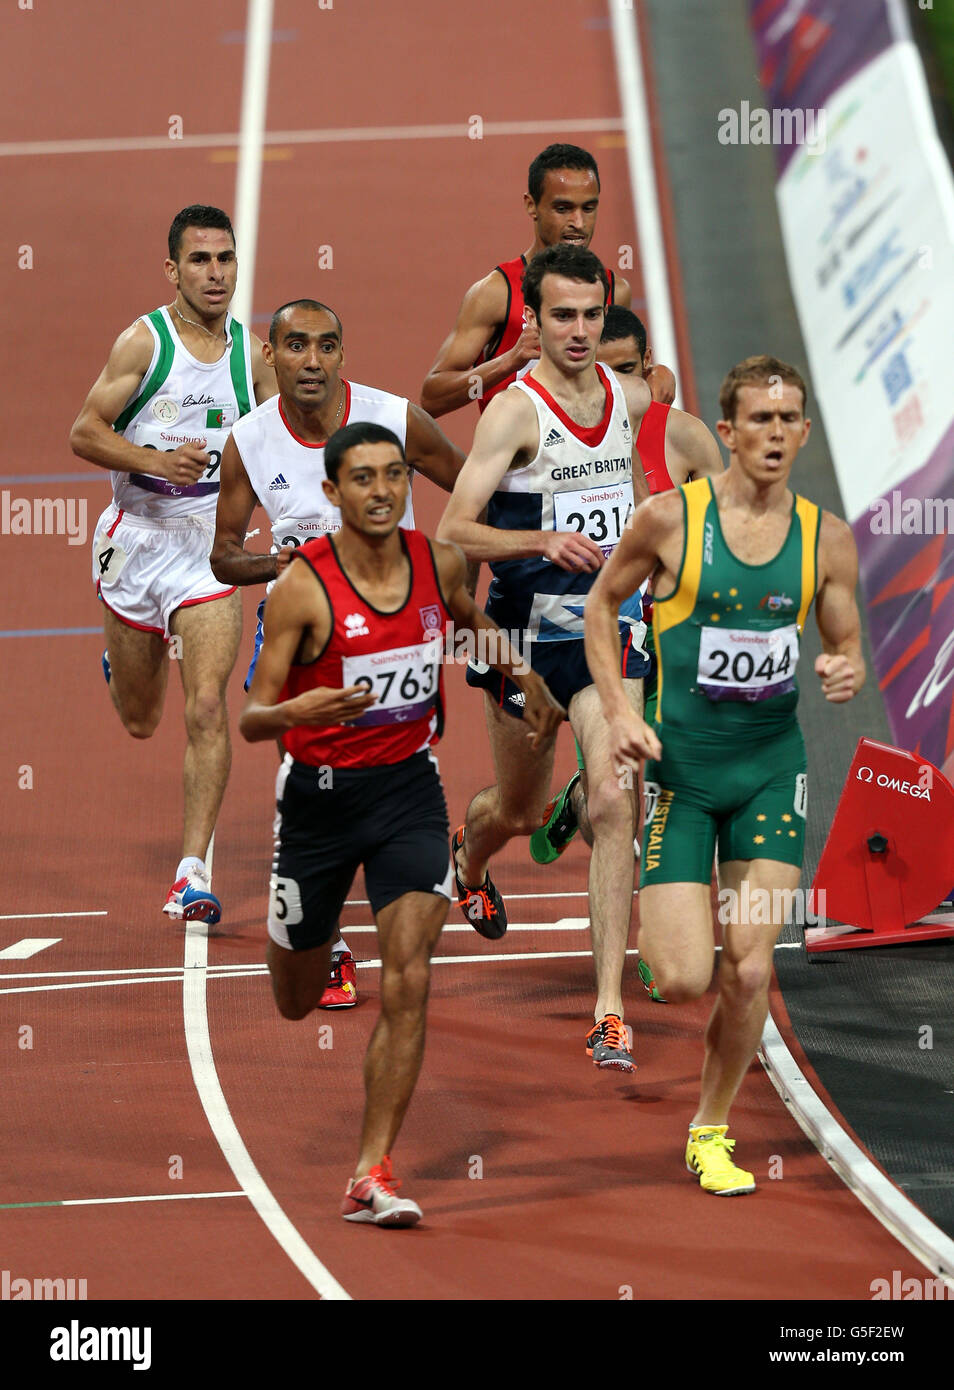 Great Britain's Dean Miller during the mens 1500m T37 category race in the Olympic Stadium. Stock Photo